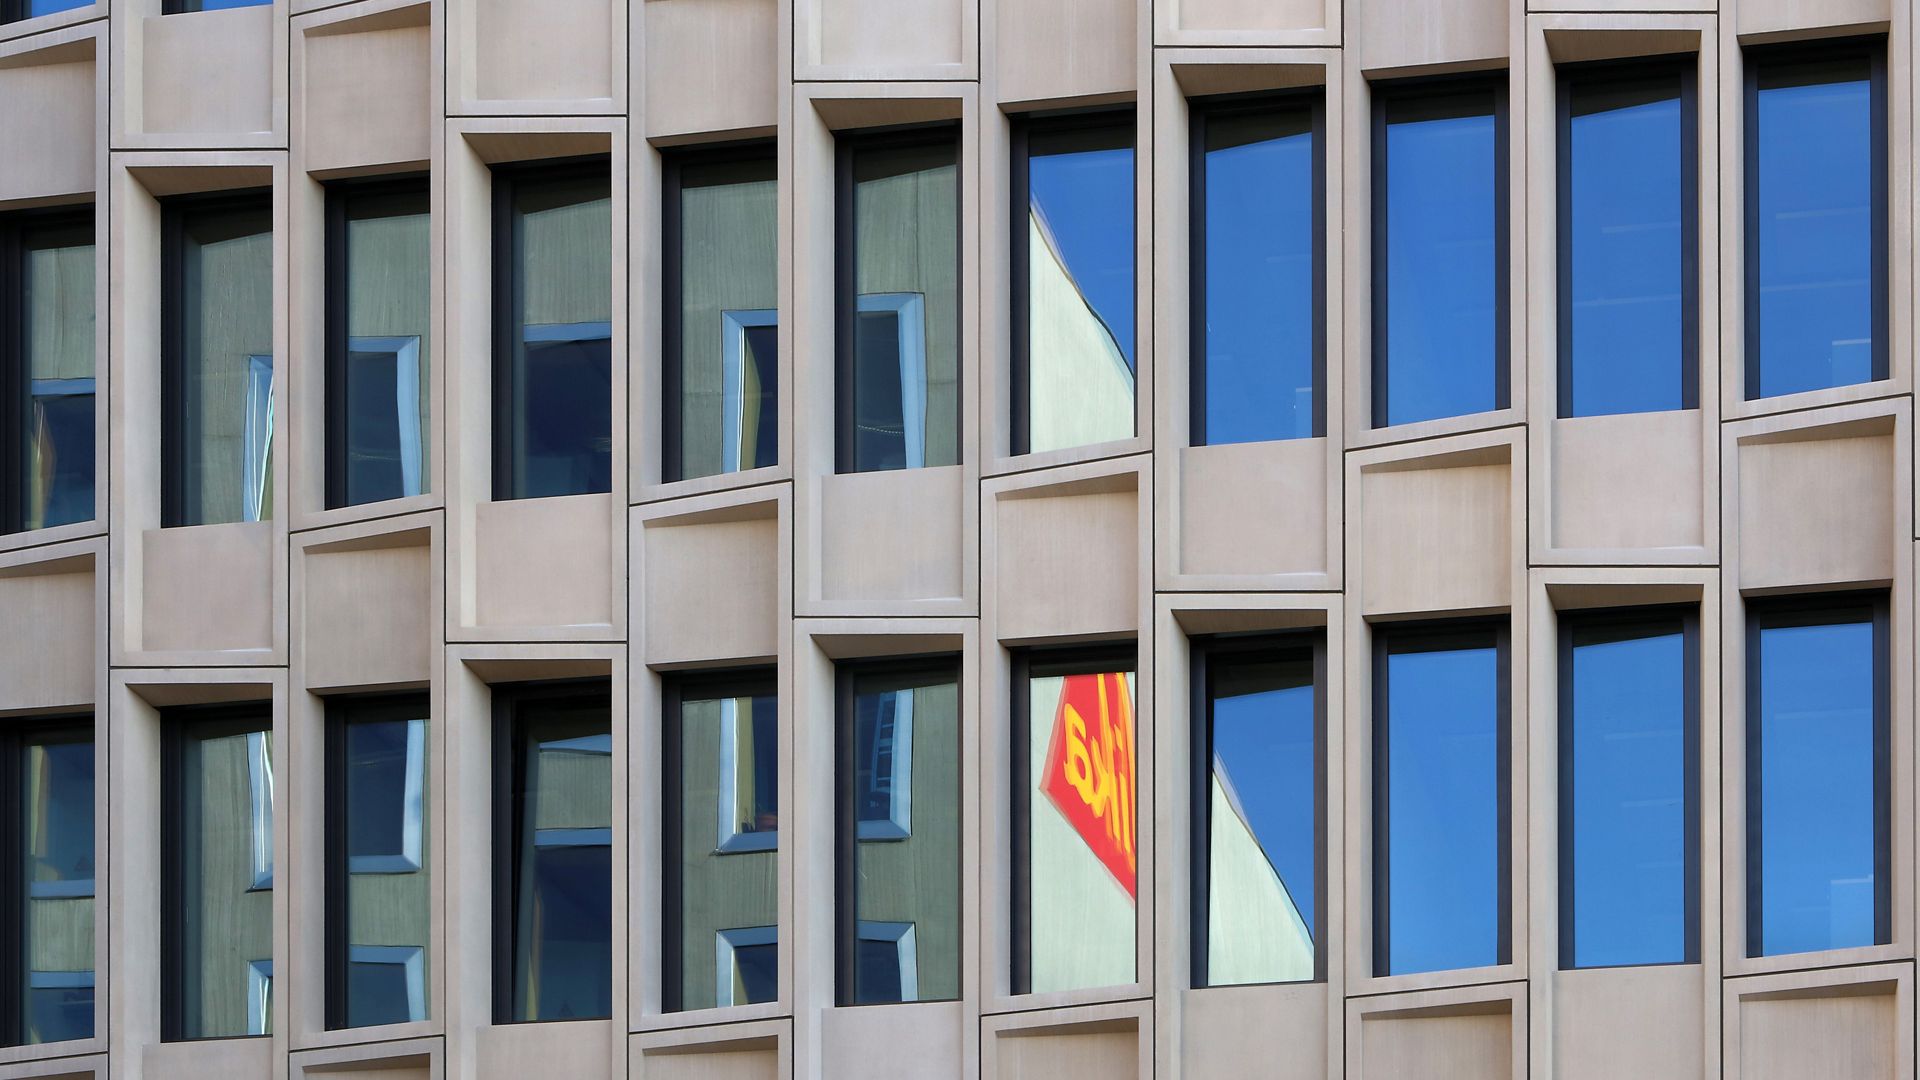 Facade of Sika office building in Zurich